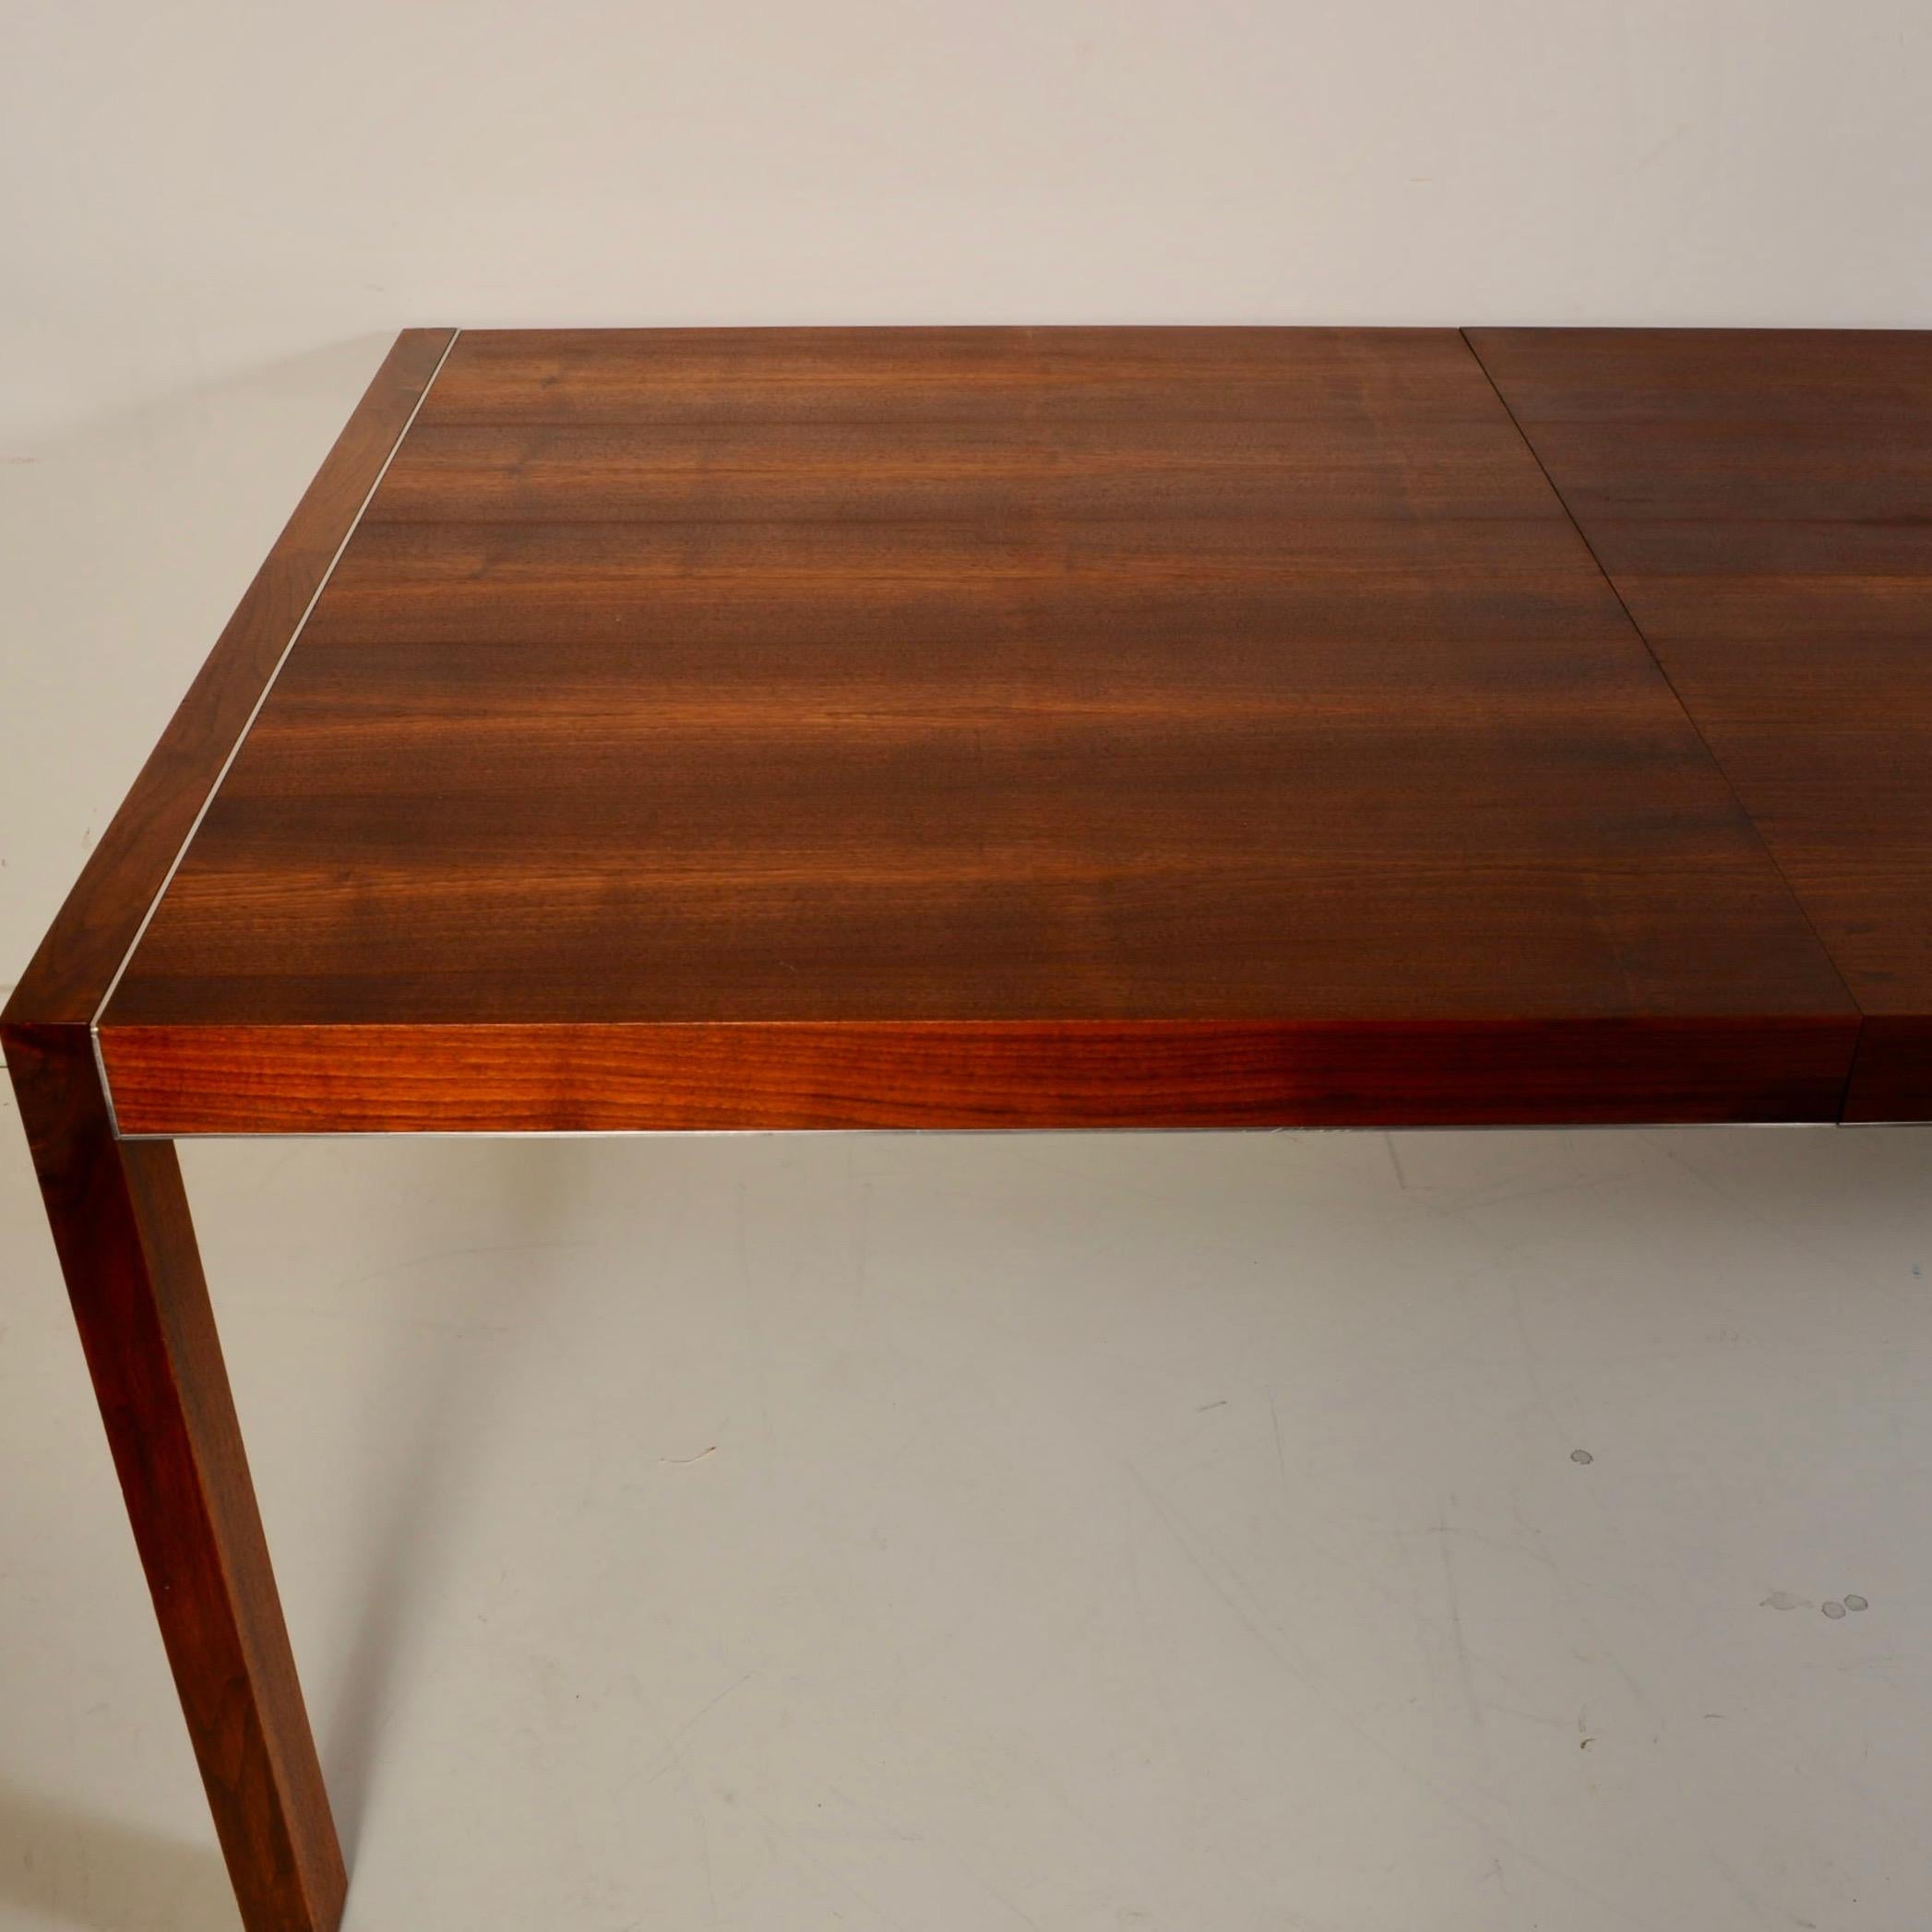 Large dining table that features a great bookmatched walnut veneer, trimmed in stainless steel; insets on each top end and along skirt. Made in Canada in the seventies, this has always had a felt cover over it whenever not in use. Table is just